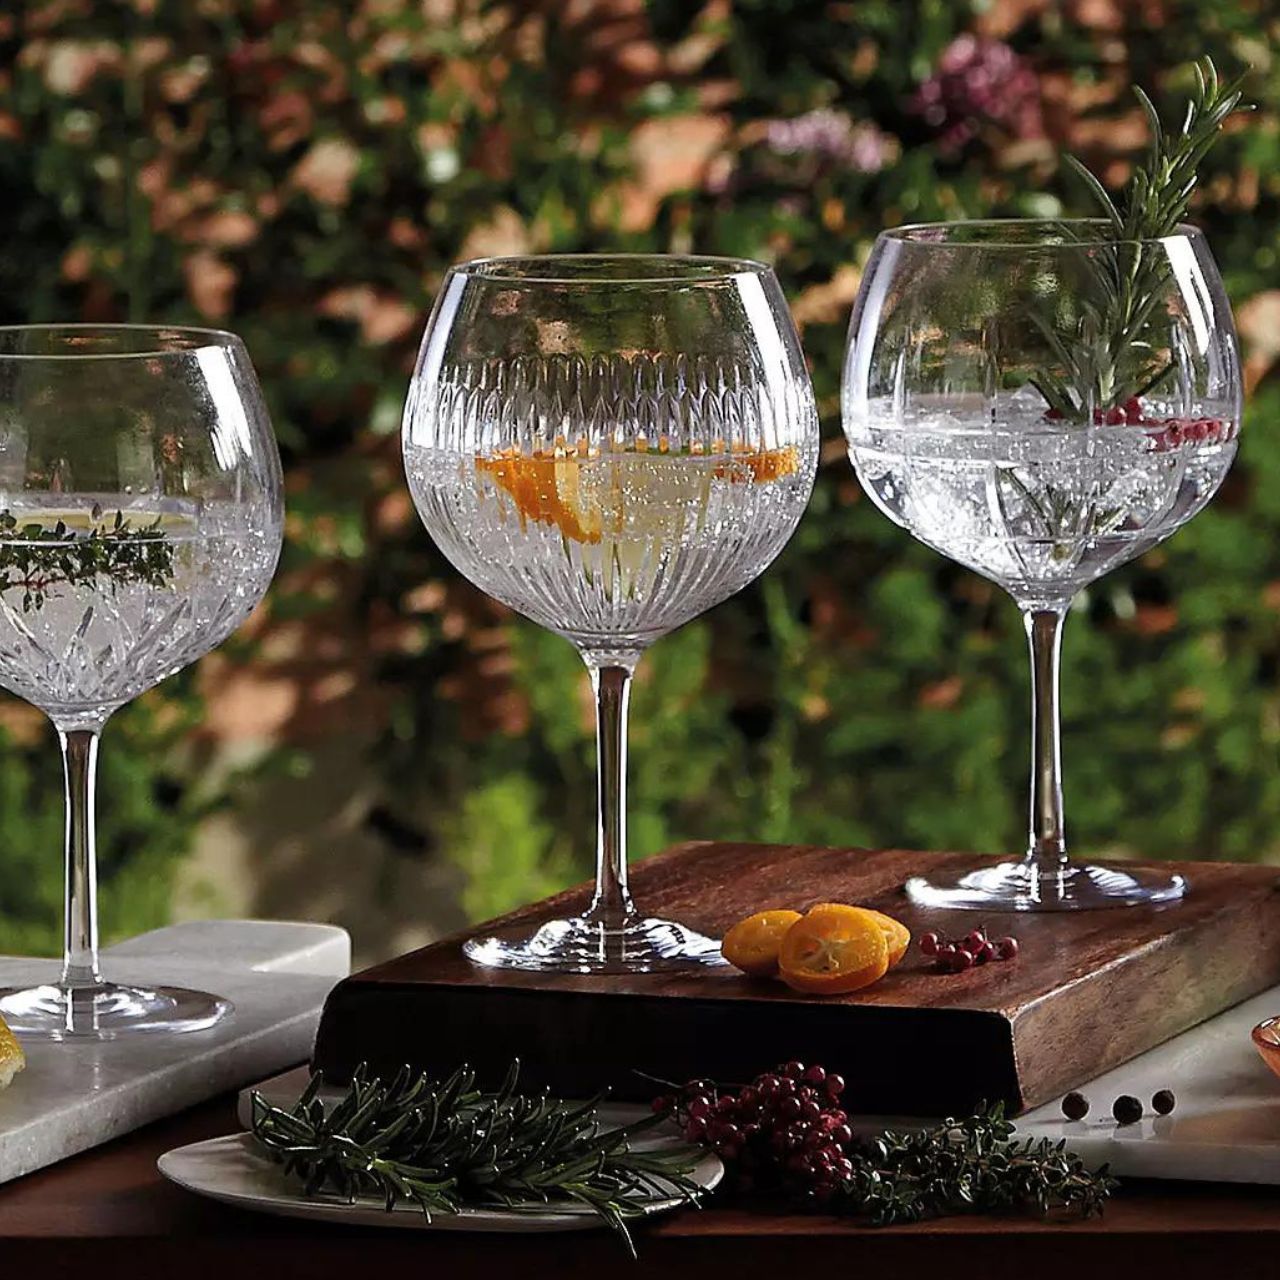 Waterford Gin Journeys Aras Balloon Glasses Pair Gin Journeys is a collection created for the optimum Gin experience. Steeped in history with inspiration being drawn from Waterford's heritage to gin, dating back to the Victorian era. Waterford's striking range of gin glasses have been designed with tasting experts to help enrich the aromas and infuse the flavors of the botanicals.